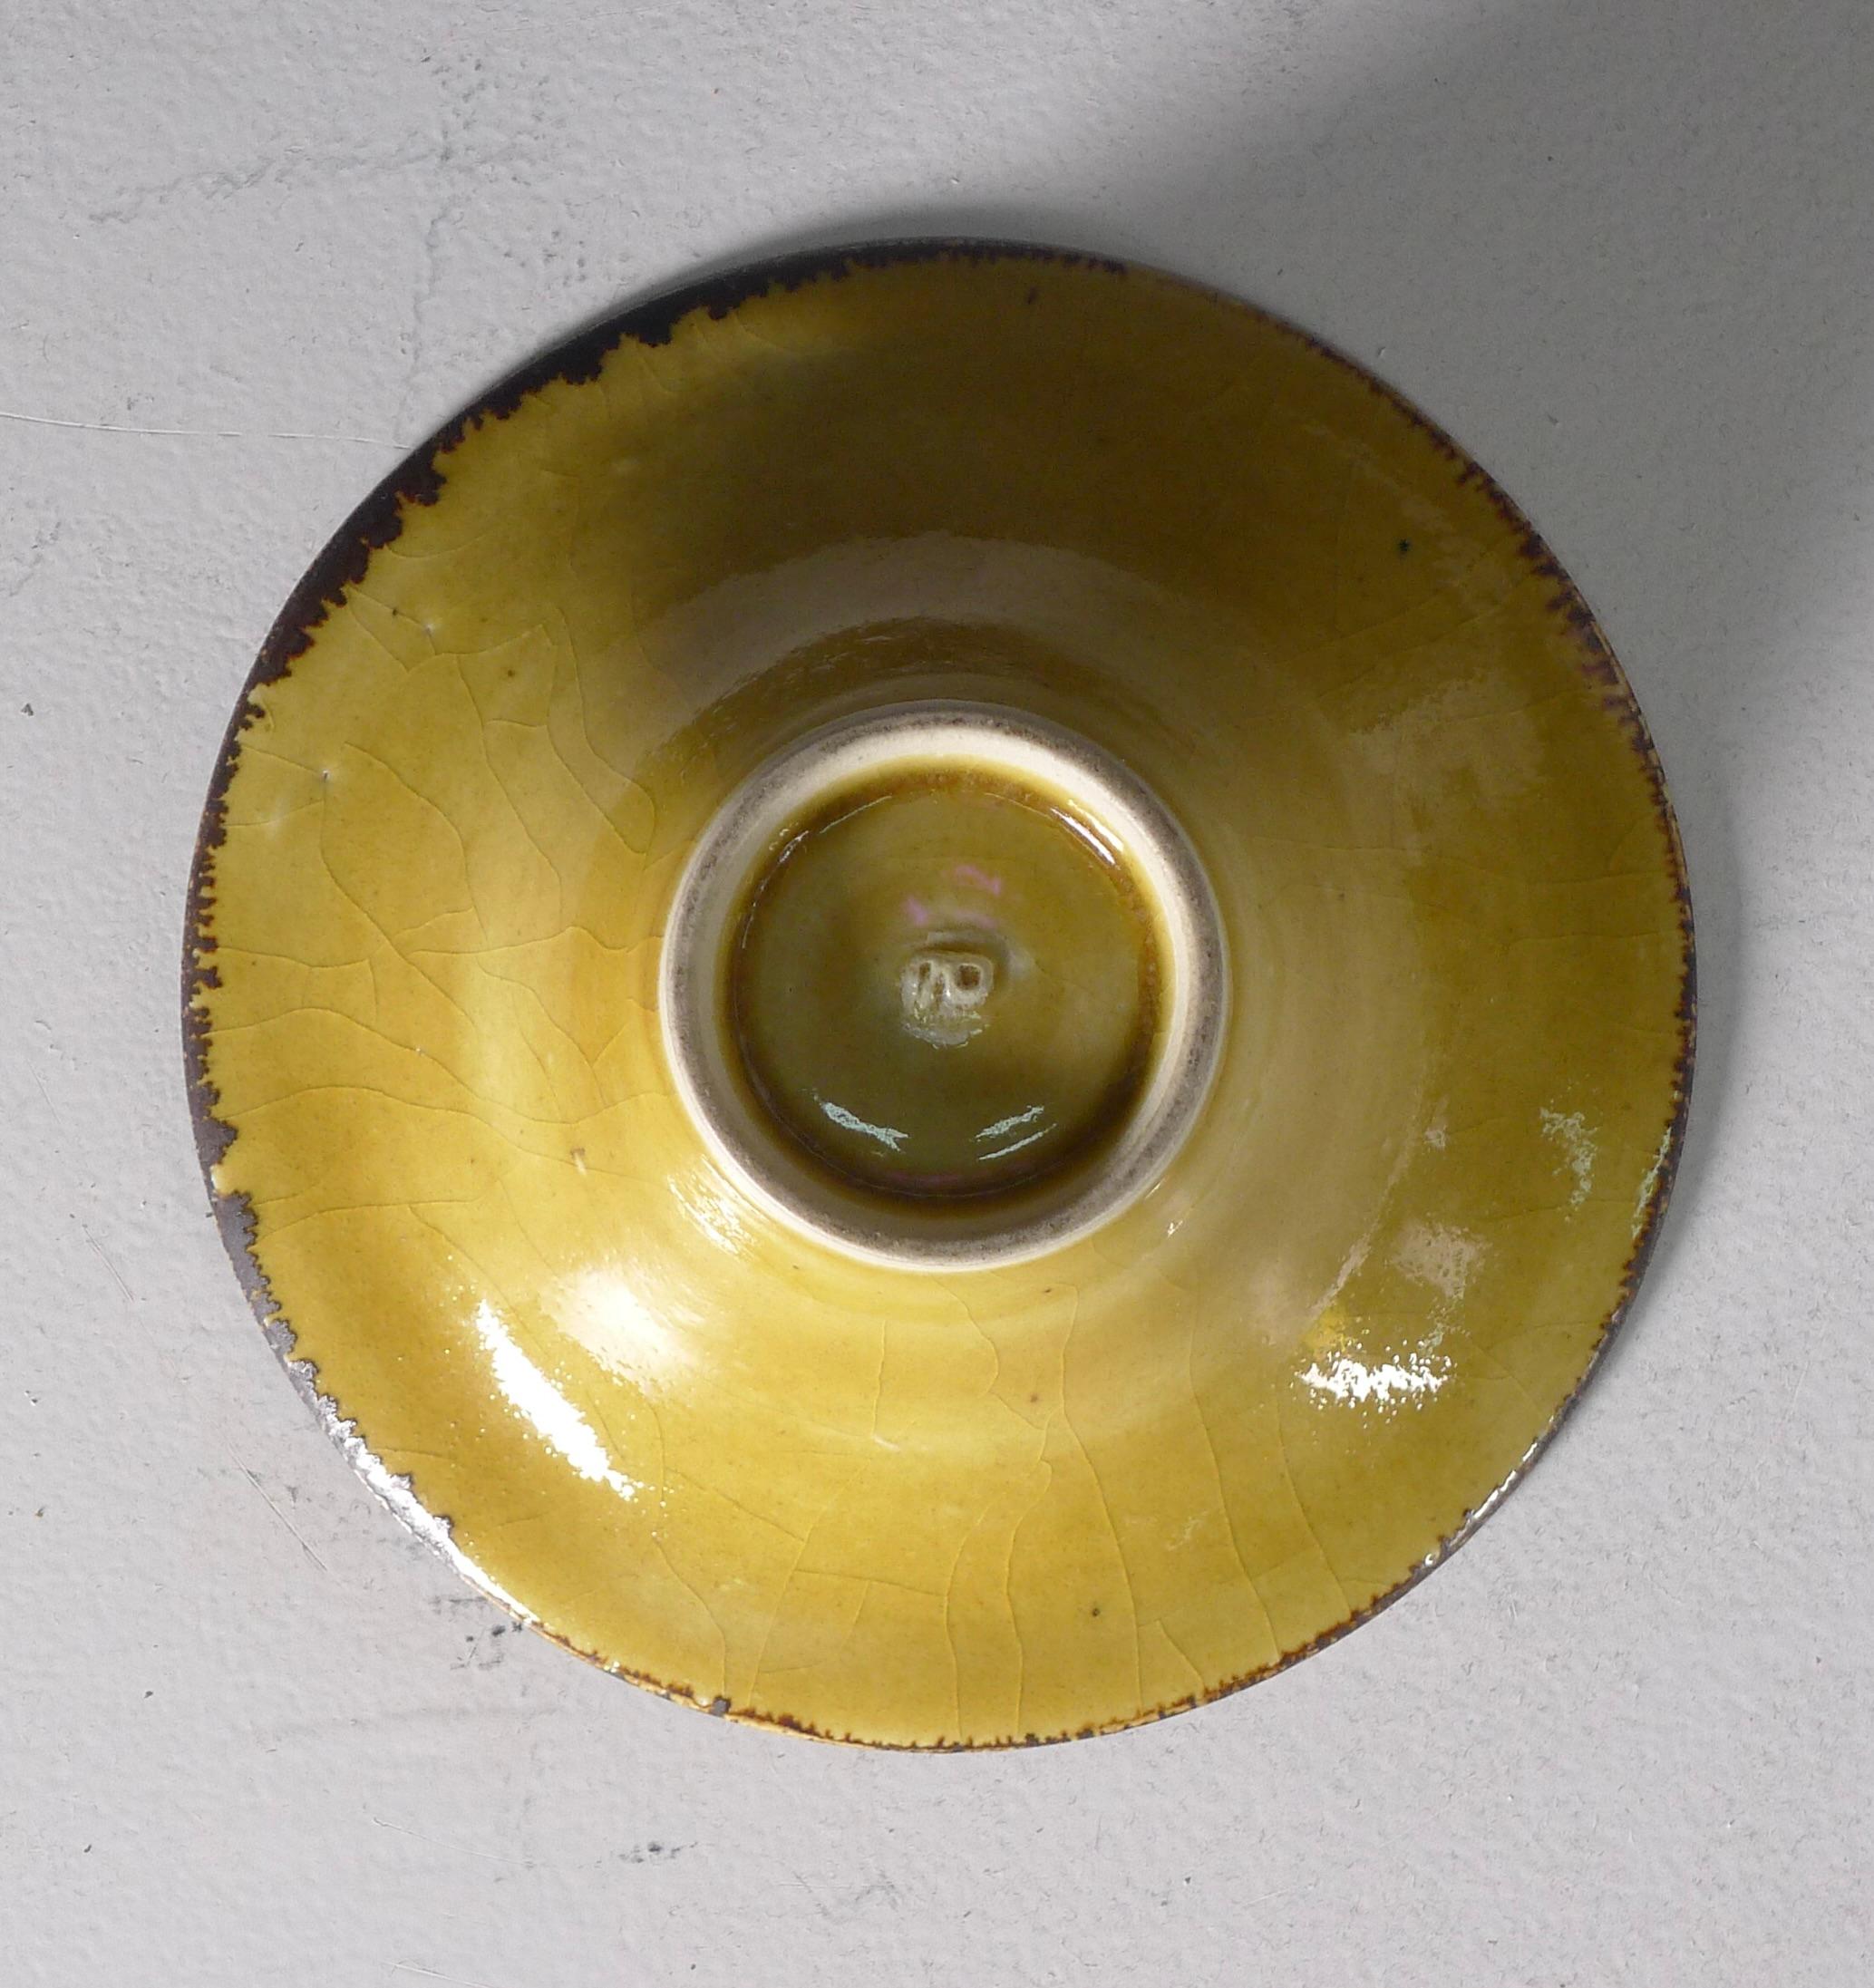 Lucie Rie (British/Austrian 1902-1995), a porcelain bowl of flaring form, uranium yellow glaze with craquelure and running manganese band to rim, impressed seal mark, 14.7cm diameter, 5.9cm high

This bowl, with its slightly irregular shape,